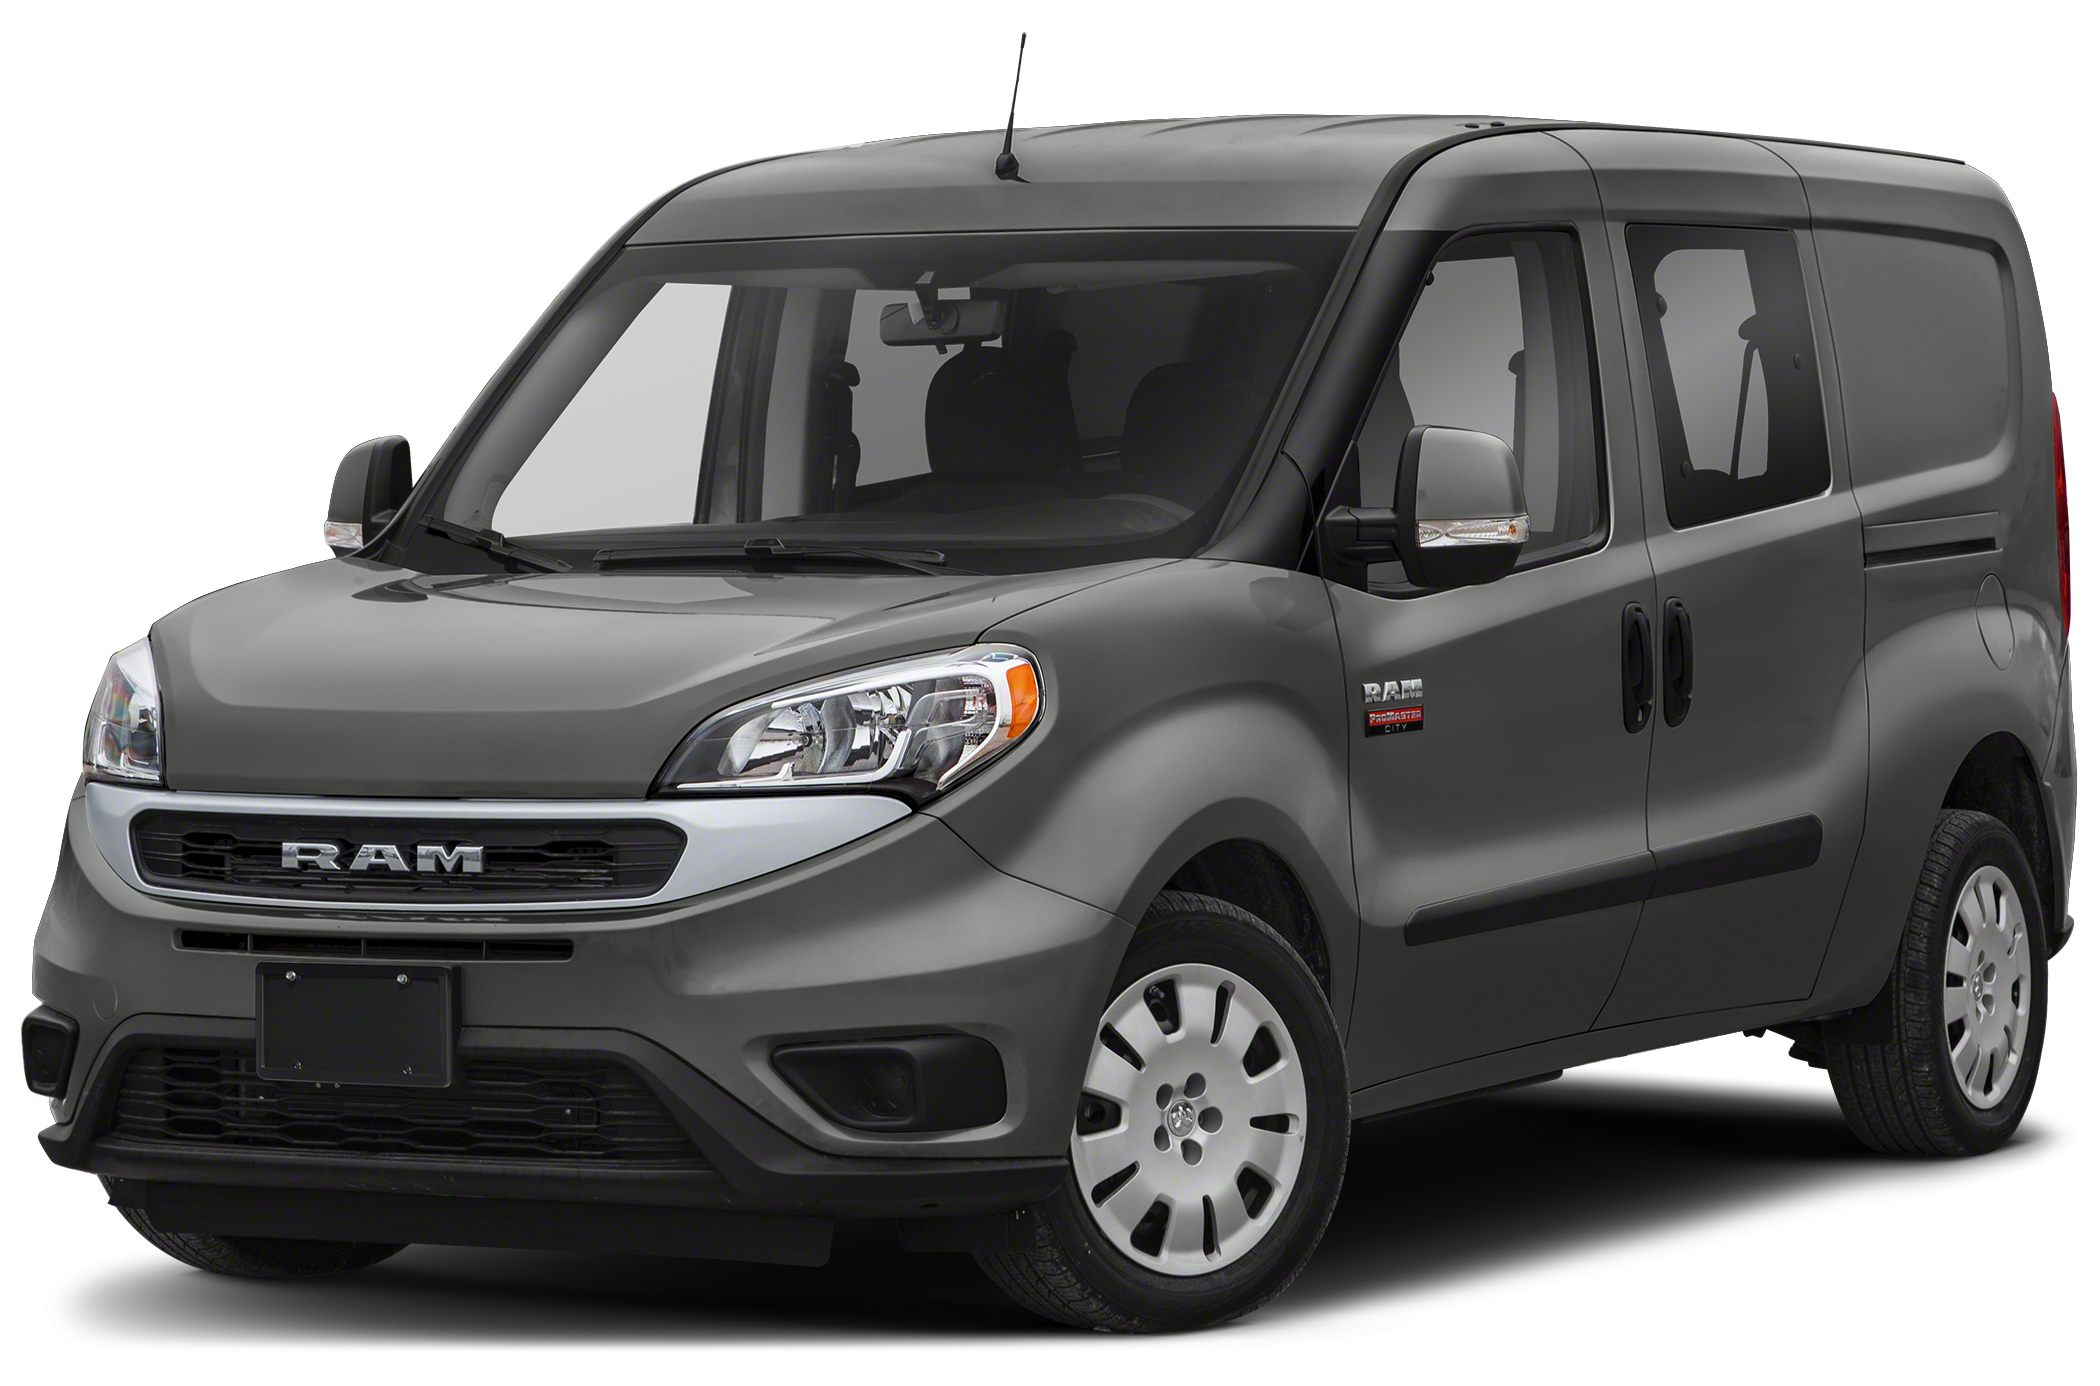 2019 Ram Promaster City Slt Wagon Pictures